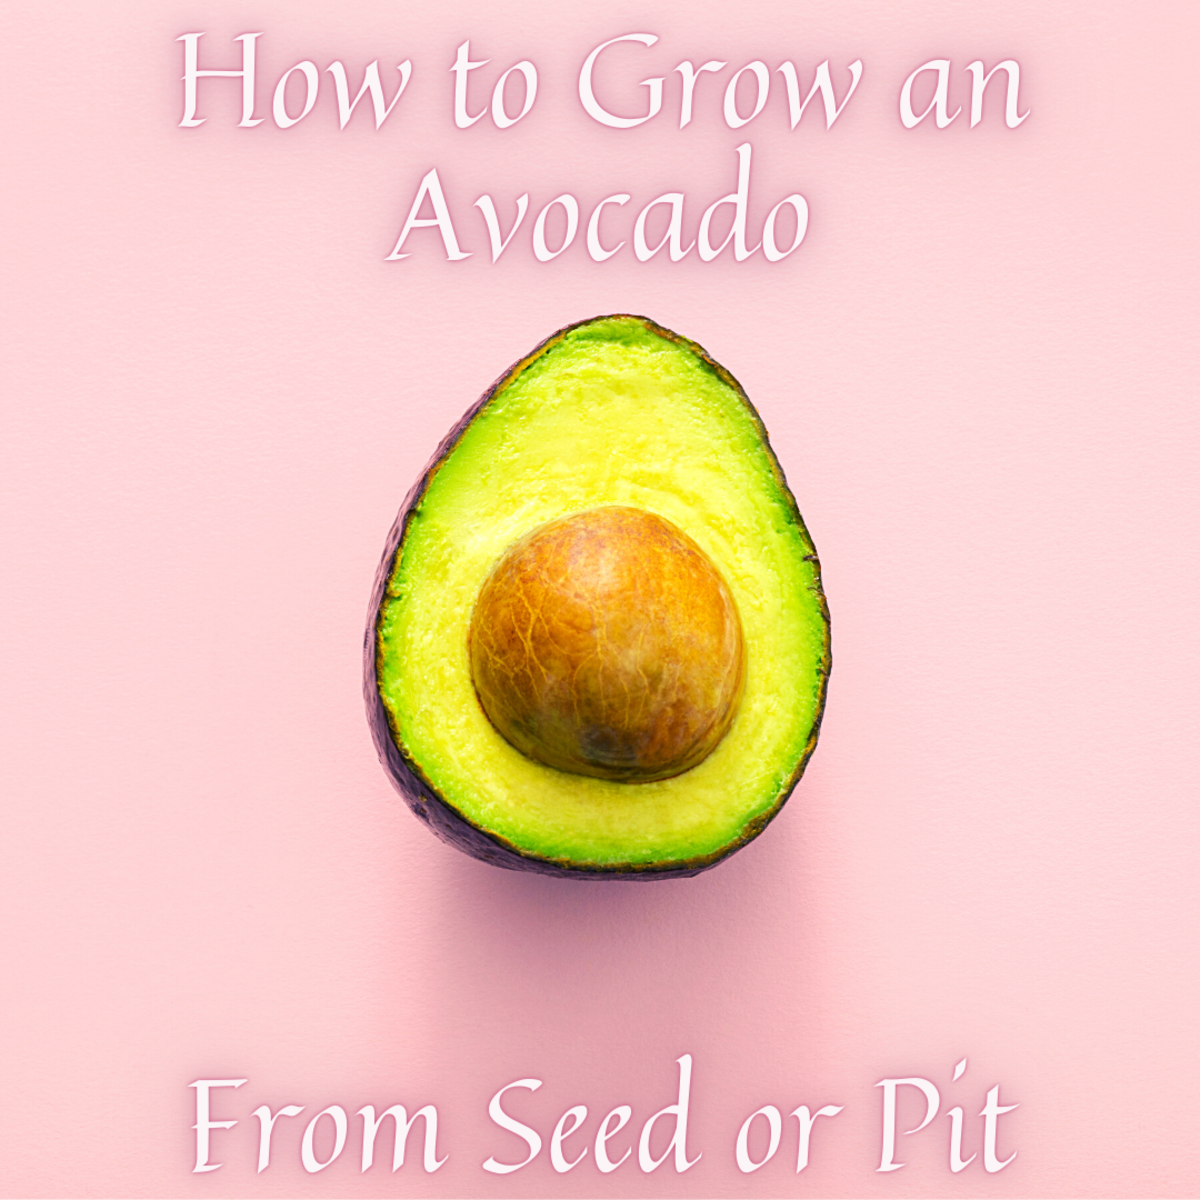 Grow avocado from seed or pit is fun and easy to do!